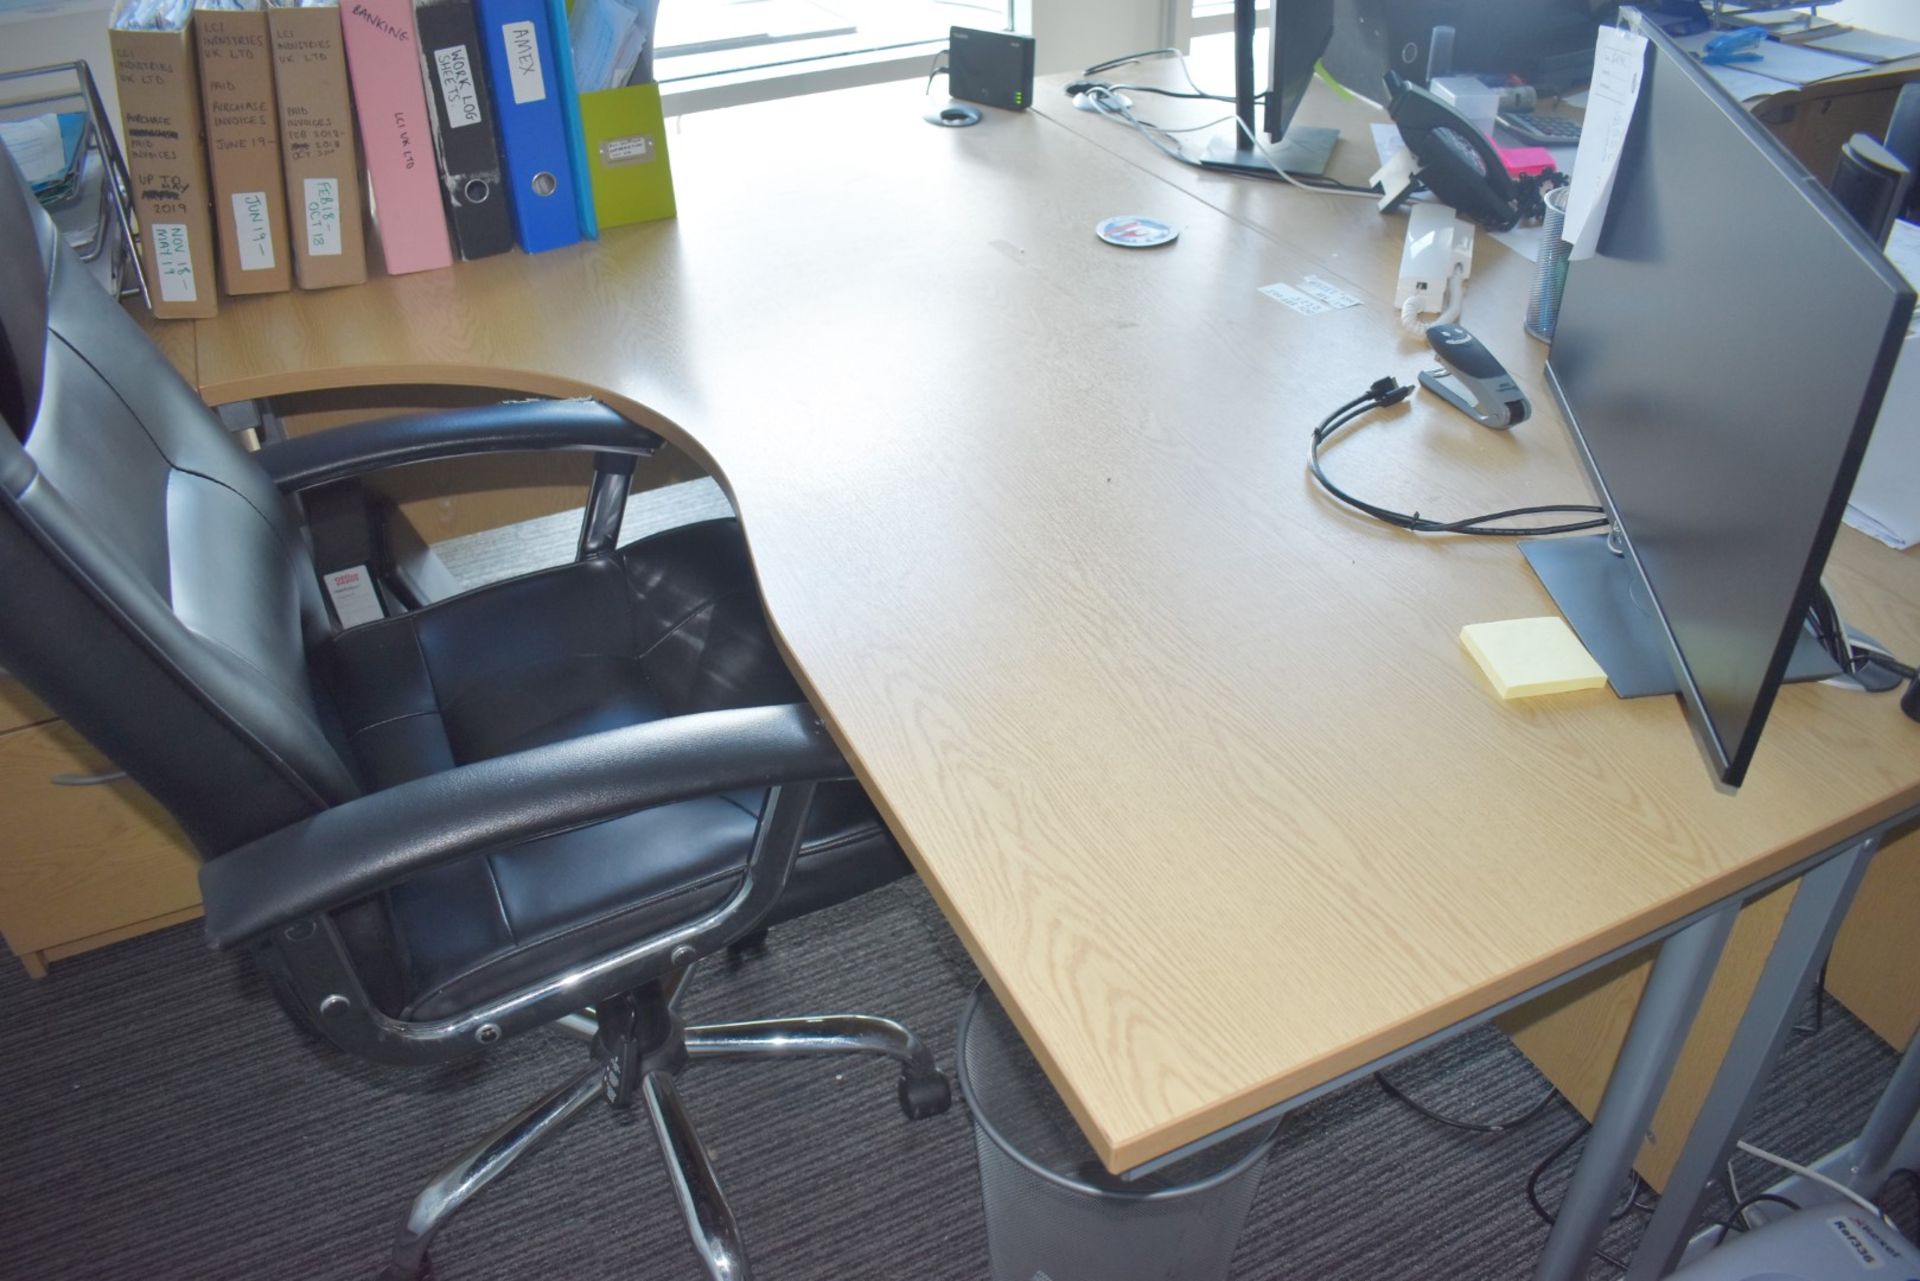 1 x Collection of Office Furniture - Includes 2 x Office Desks, 2 x Executive Leather Swivel Chairs, - Image 2 of 7